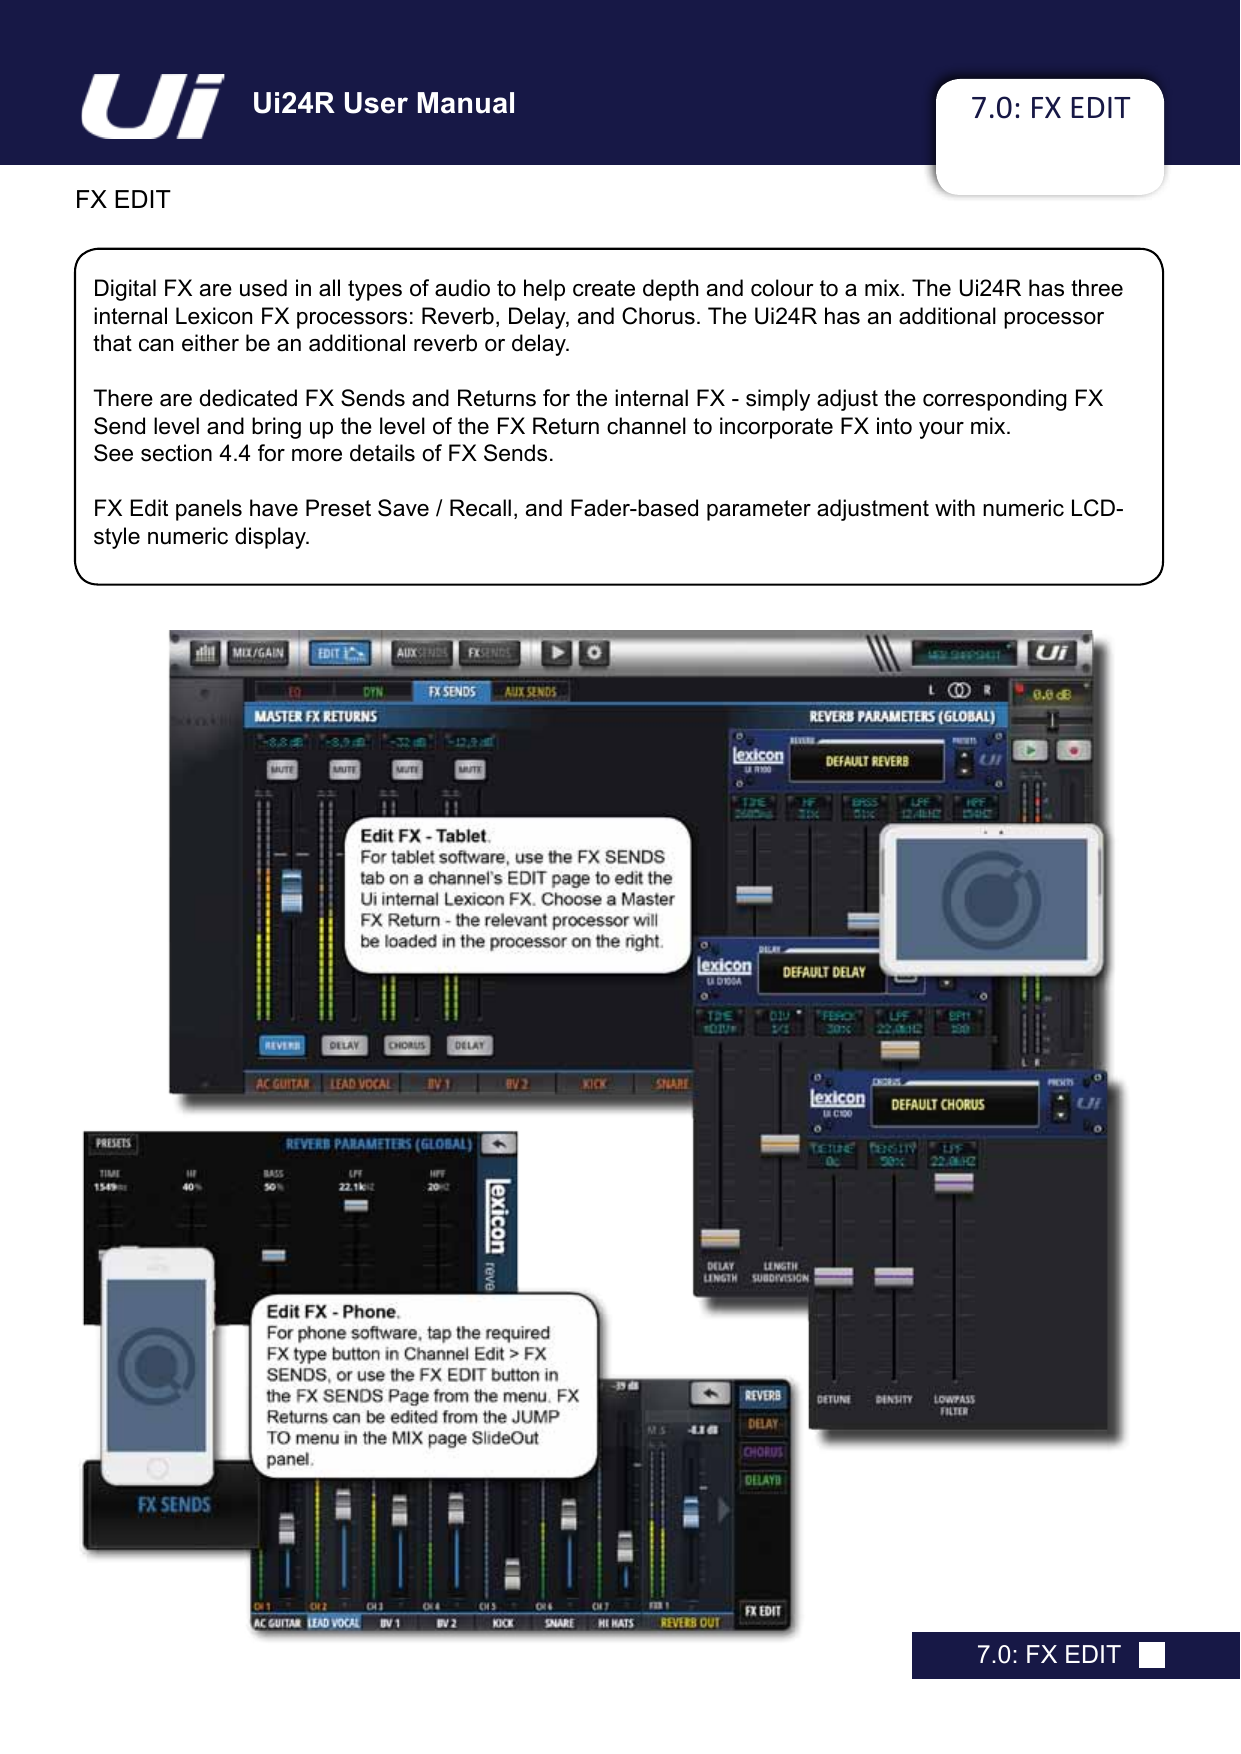 Ui24R User Manual 7.0: FX EDITFX EDIT7.0: FX EDITDigital FX are used in all types of audio to help create depth and colour to a mix. The Ui24R has three internal Lexicon FX processors: Reverb, Delay, and Chorus. The Ui24R has an additional processor that can either be an additional reverb or delay.There are dedicated FX Sends and Returns for the internal FX - simply adjust the corresponding FX Send level and bring up the level of the FX Return channel to incorporate FX into your mix.  See section 4.4 for more details of FX Sends.FX Edit panels have Preset Save / Recall, and Fader-based parameter adjustment with numeric LCD-style numeric display.